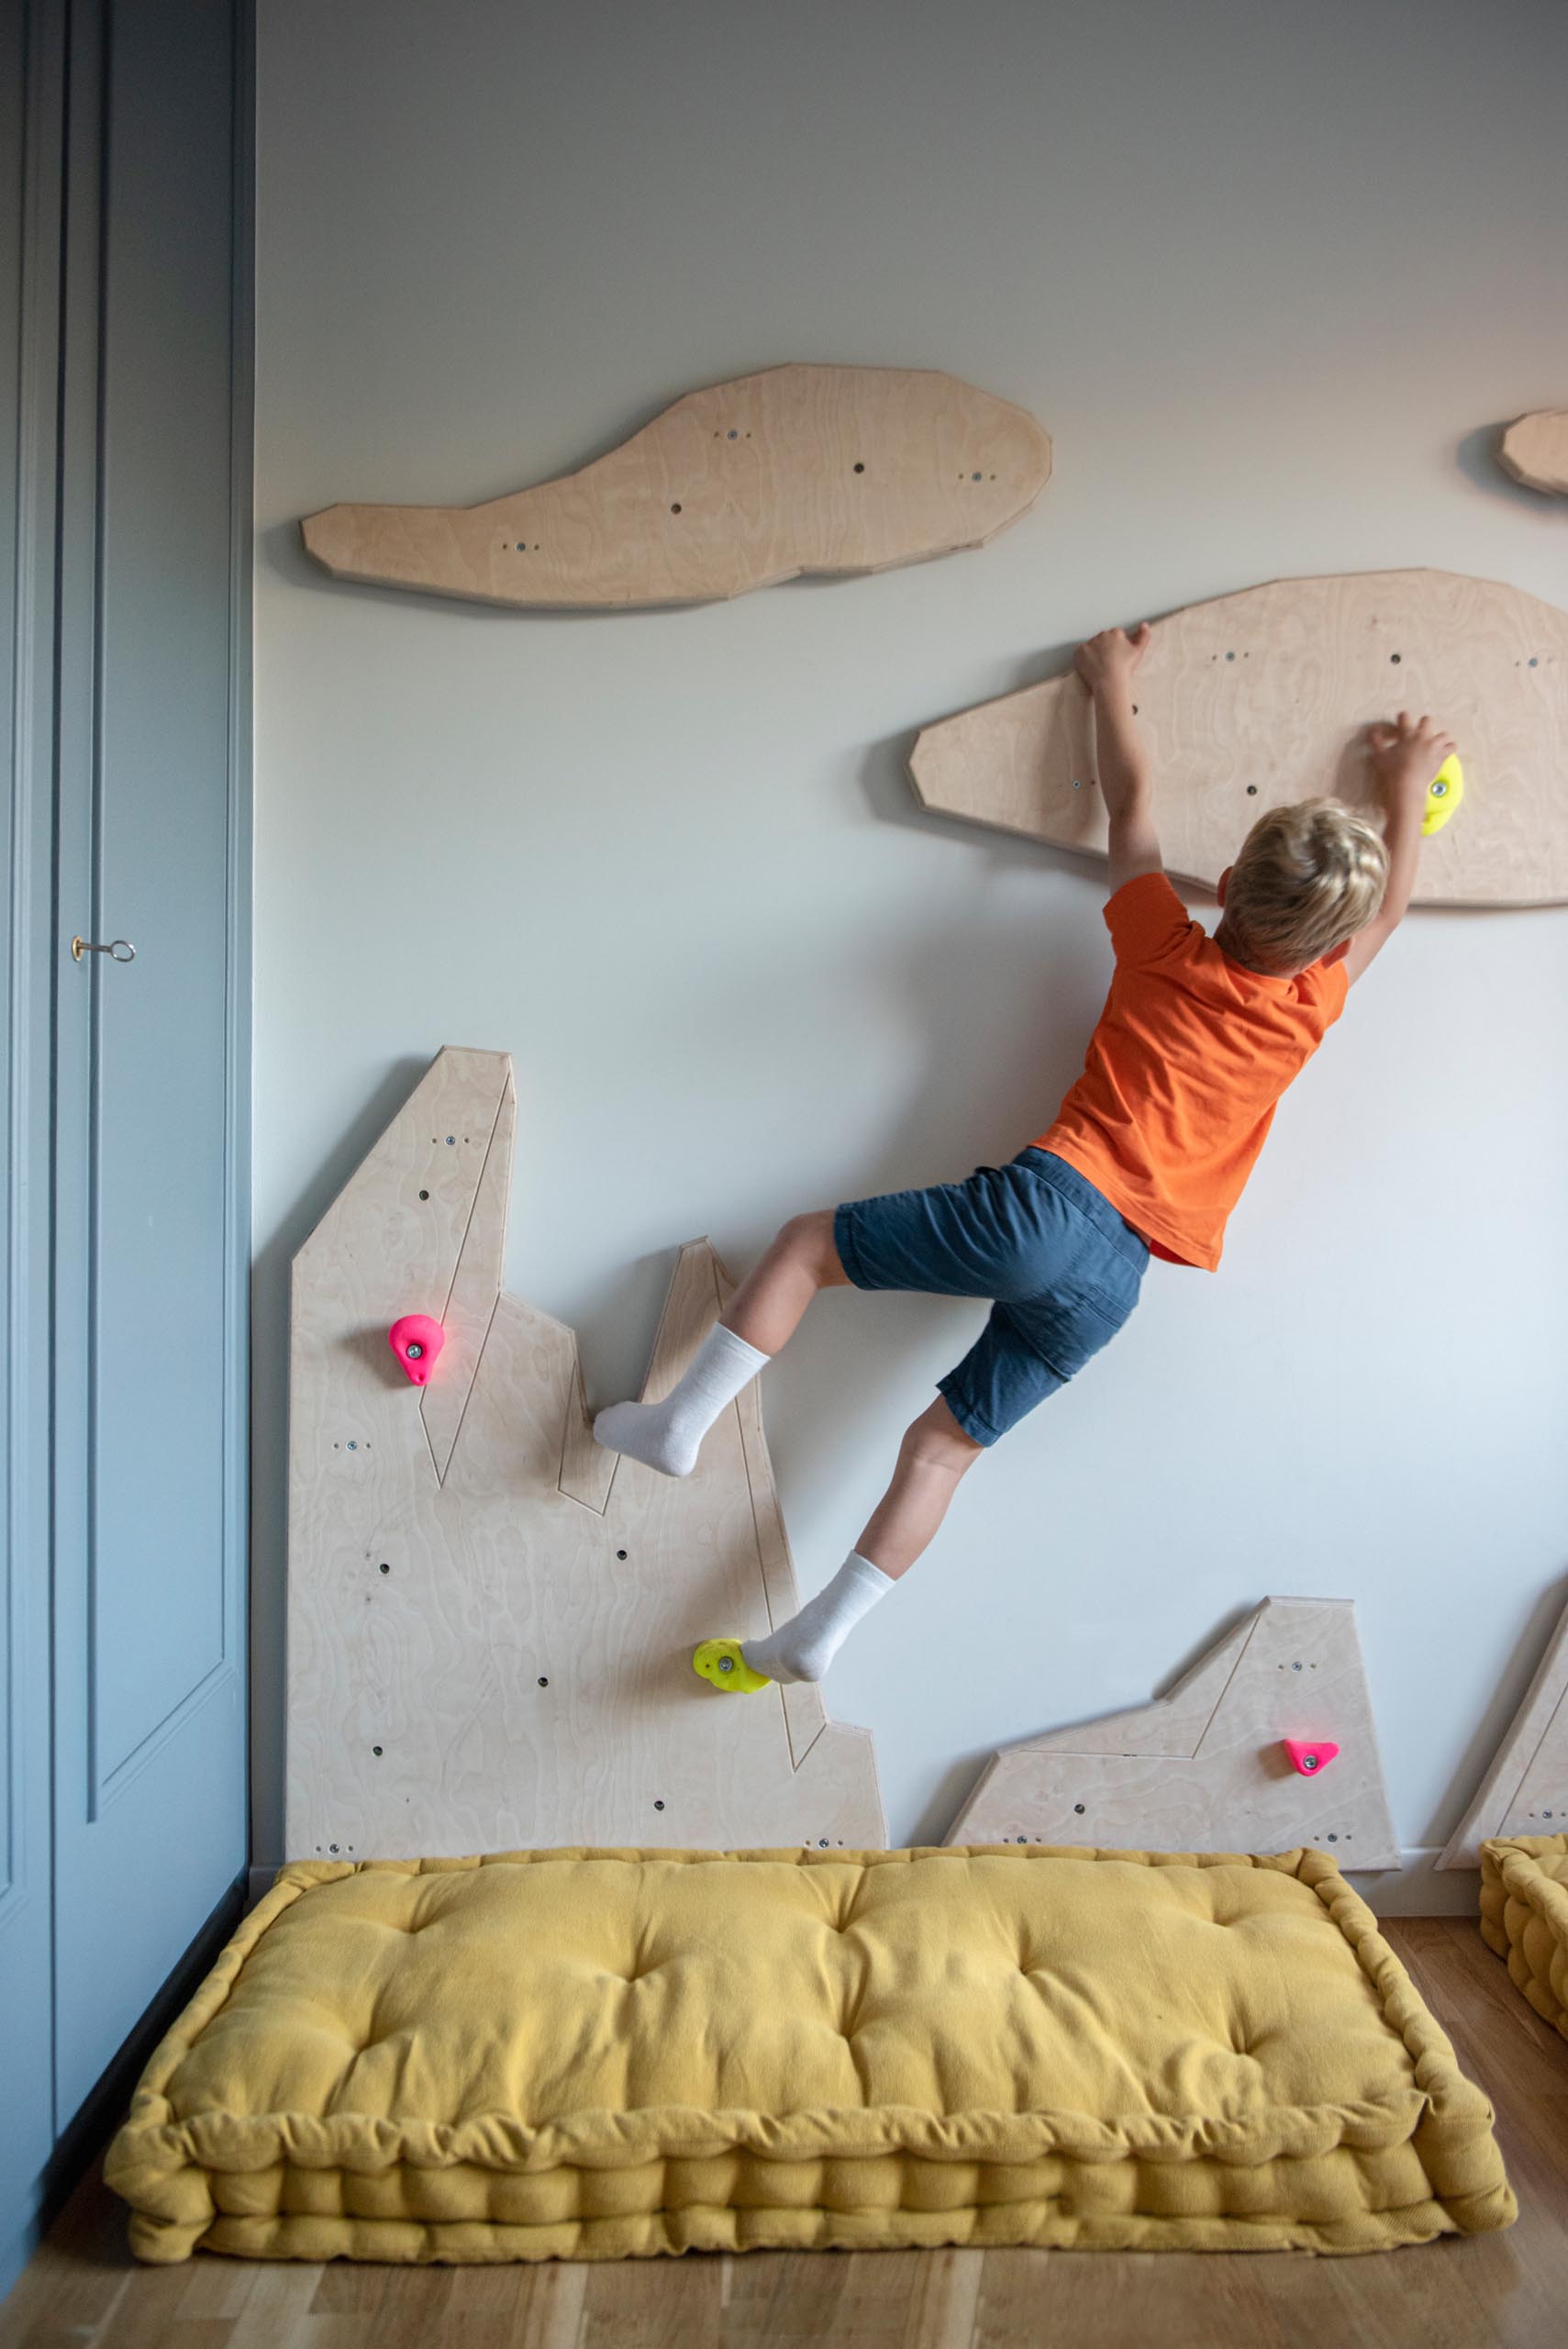 In this modern kid's bedroom, there's uniquely shaped wood cut-outs on the wall that have been designed to attach rock climbing mounts, turning the one empty wall into a climbing wall.